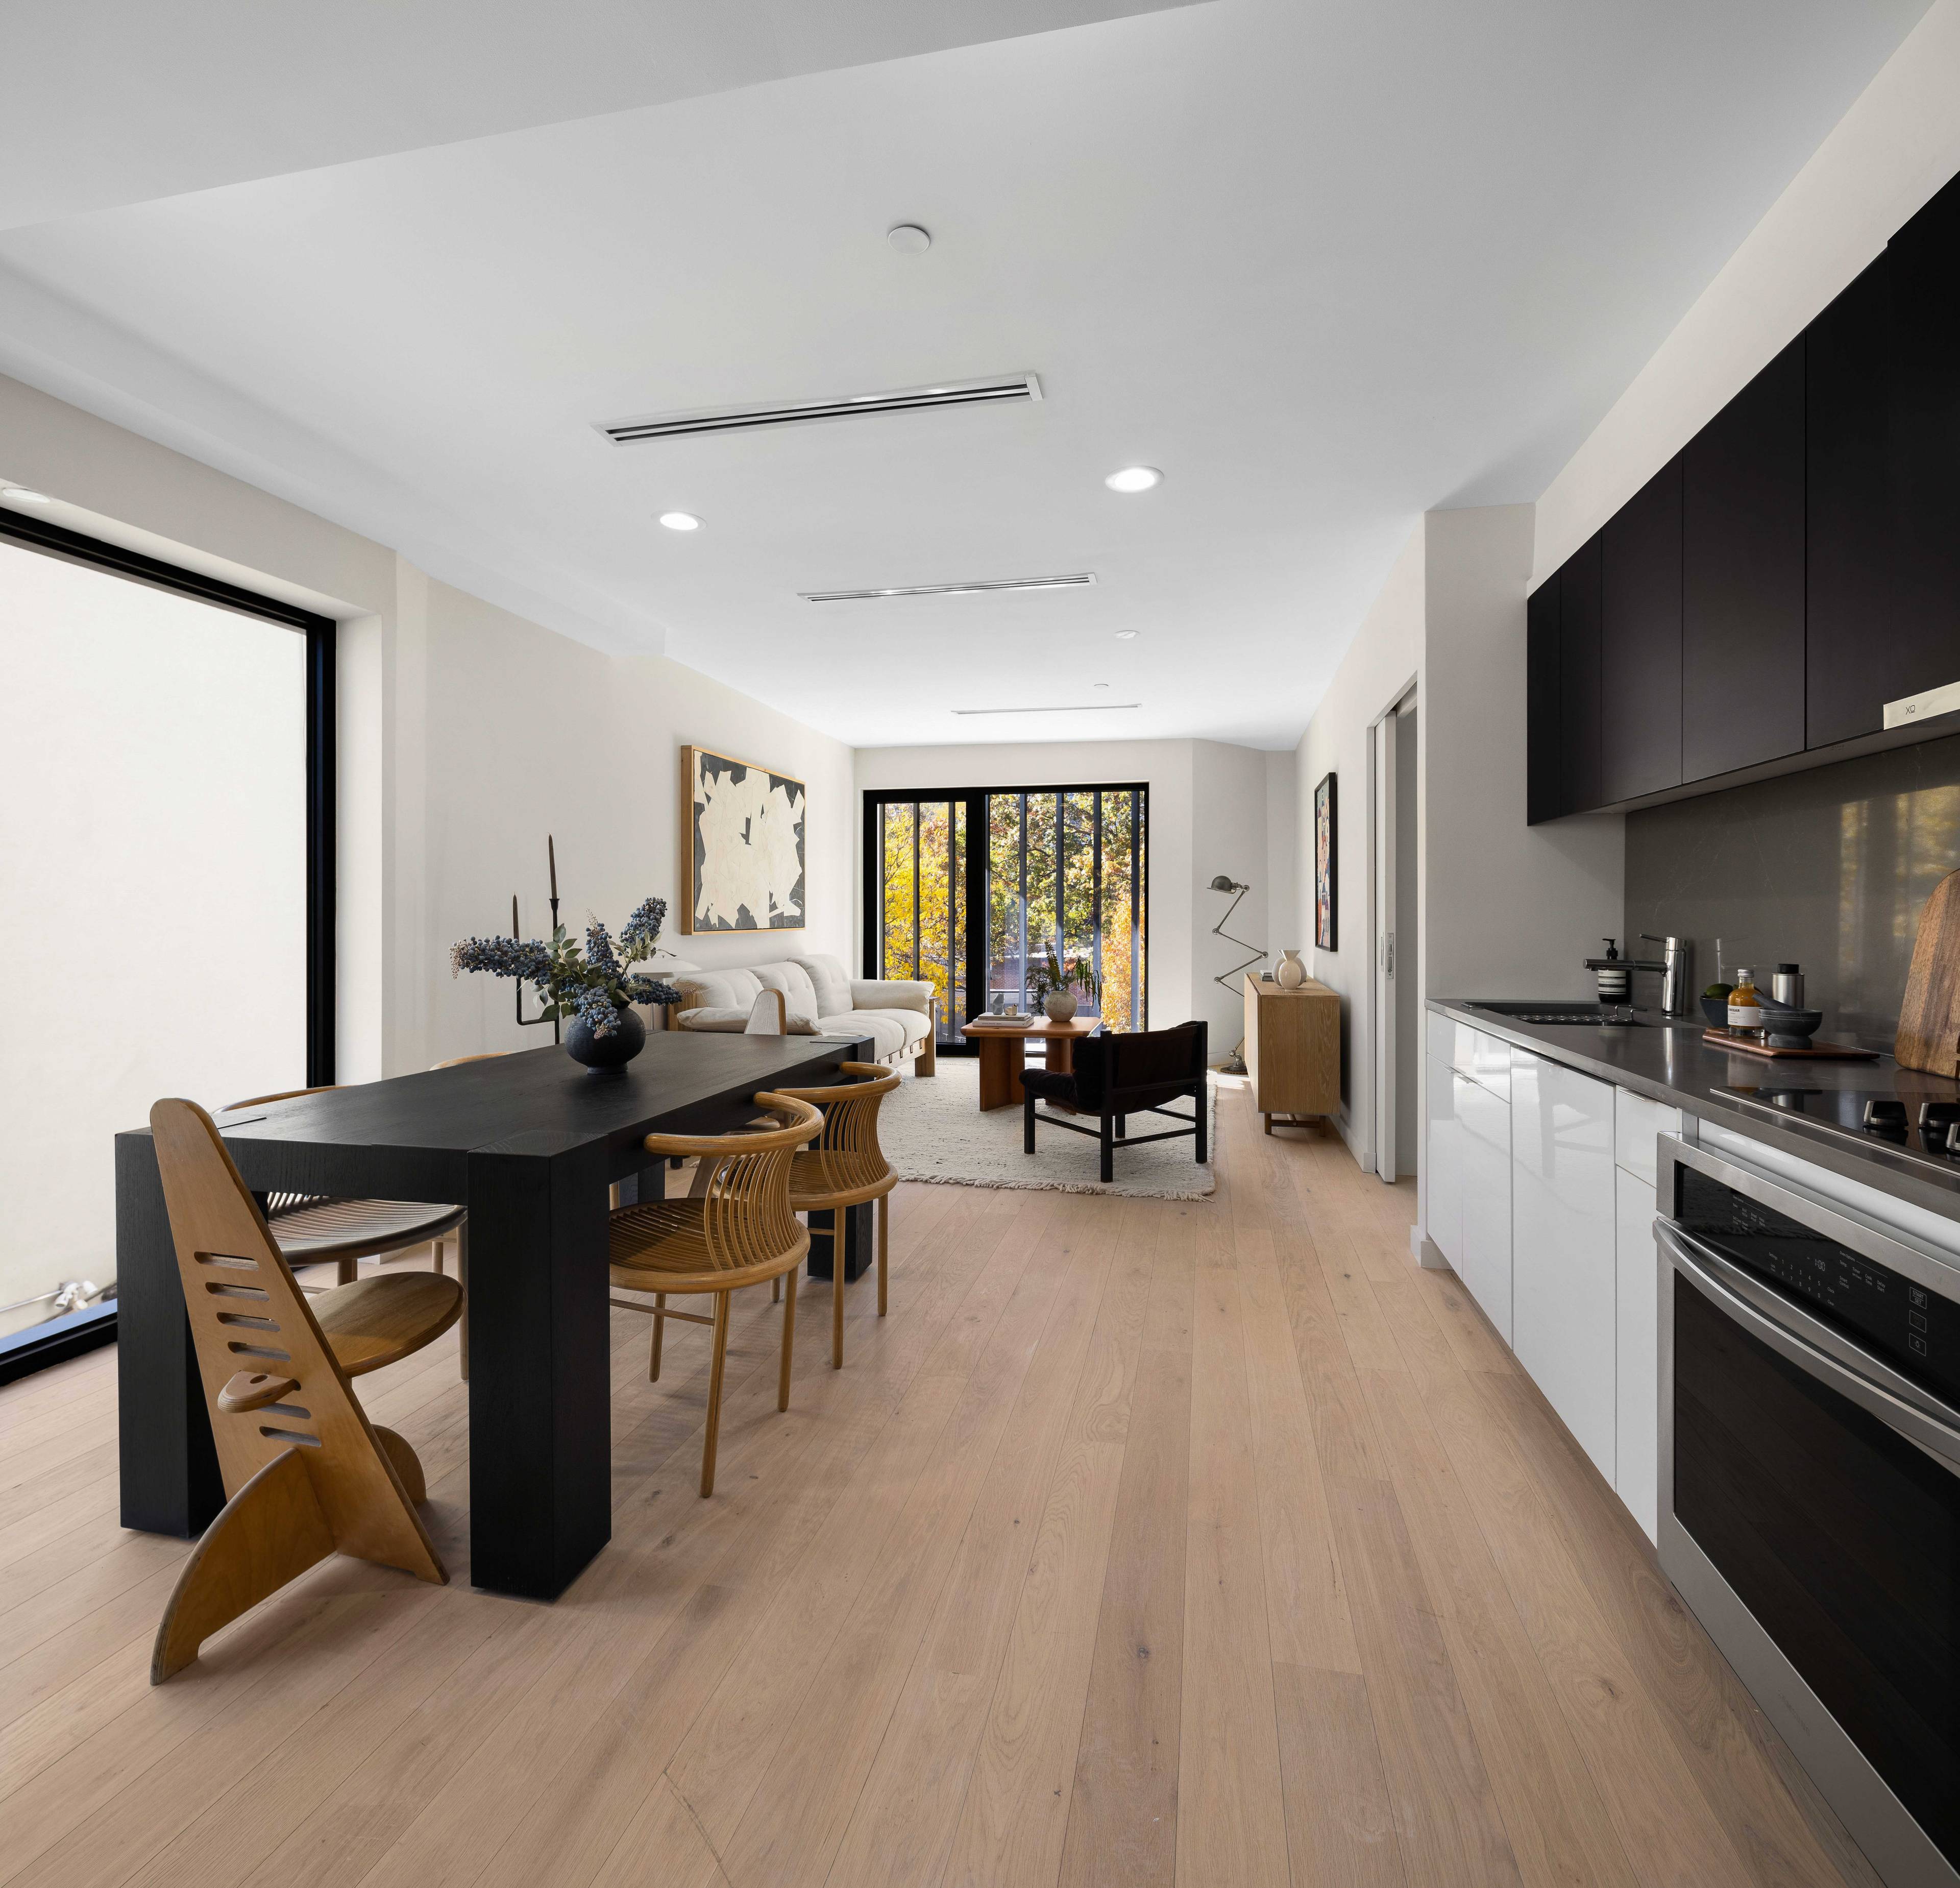 A brand new floor through condo nestled around the corner from Fort Greene Park, this pristine 2 bedroom, 2 bathroom home is a portrait of contemporary minimalism and urban design.